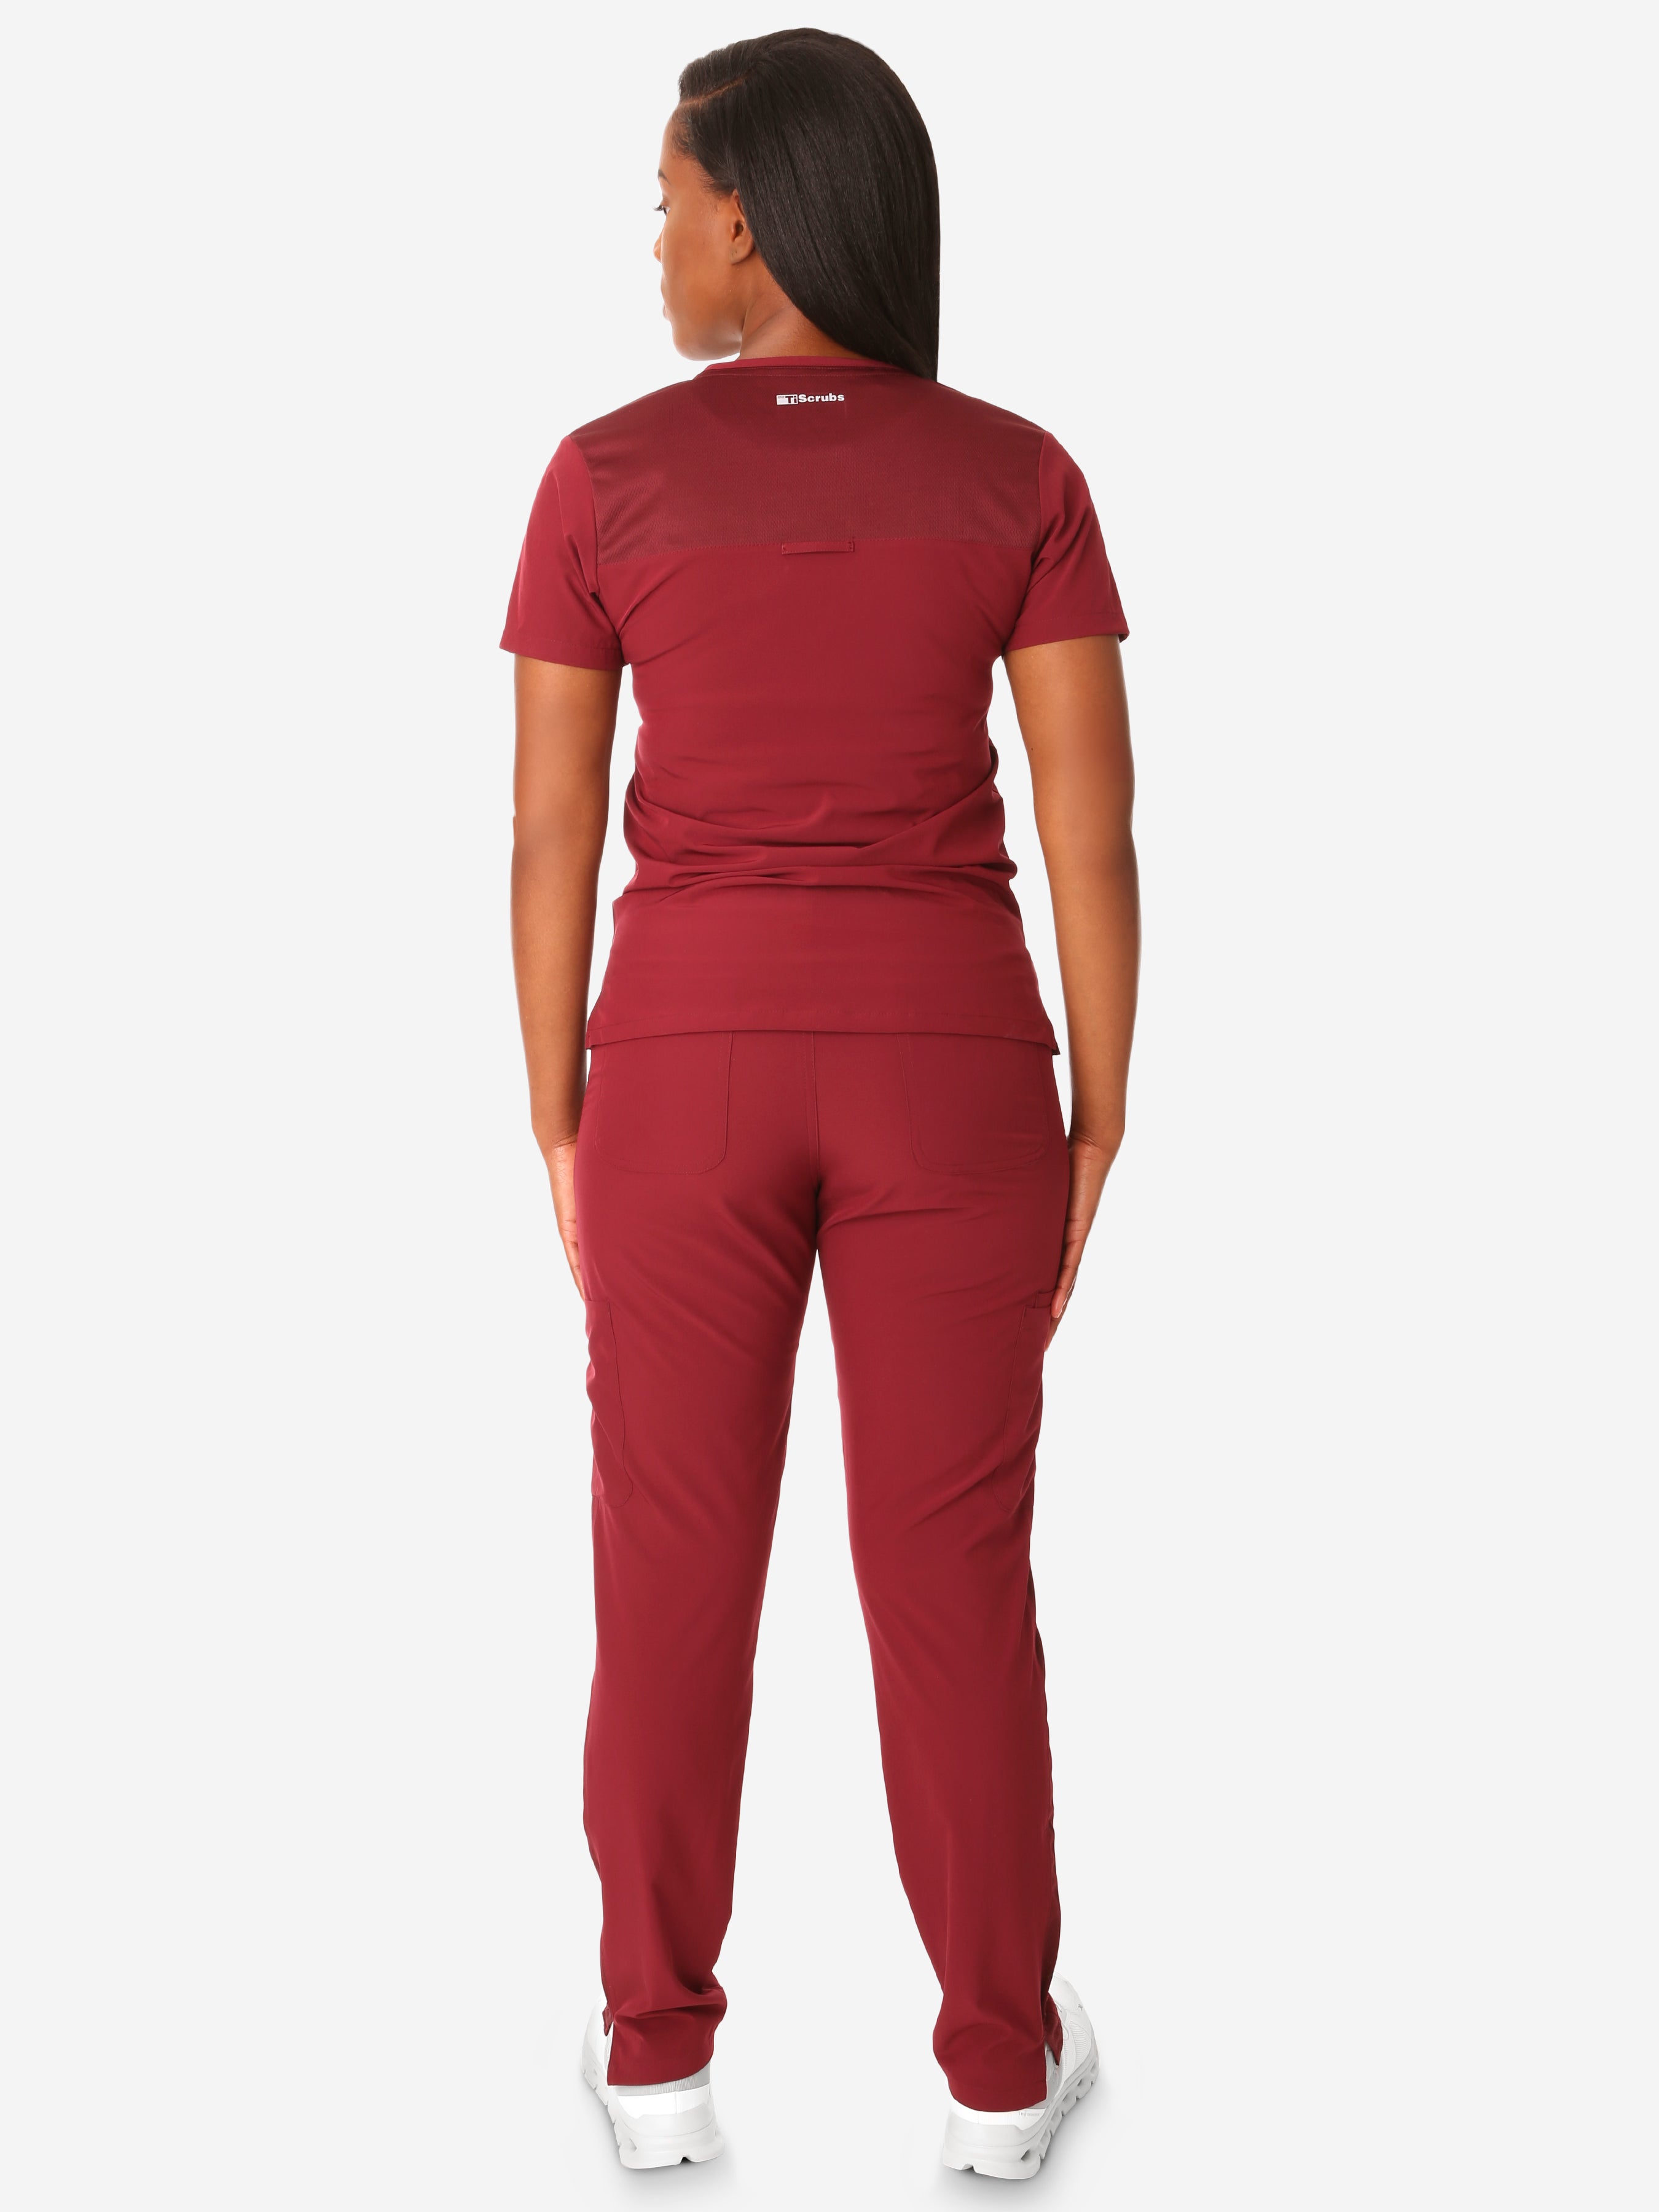 TiScrubs Women&#39;s Stretch Bold Burgundy One-Pocket Tuckable Scrub Top and 9-Pocket Pants Untucked  Full Body Back